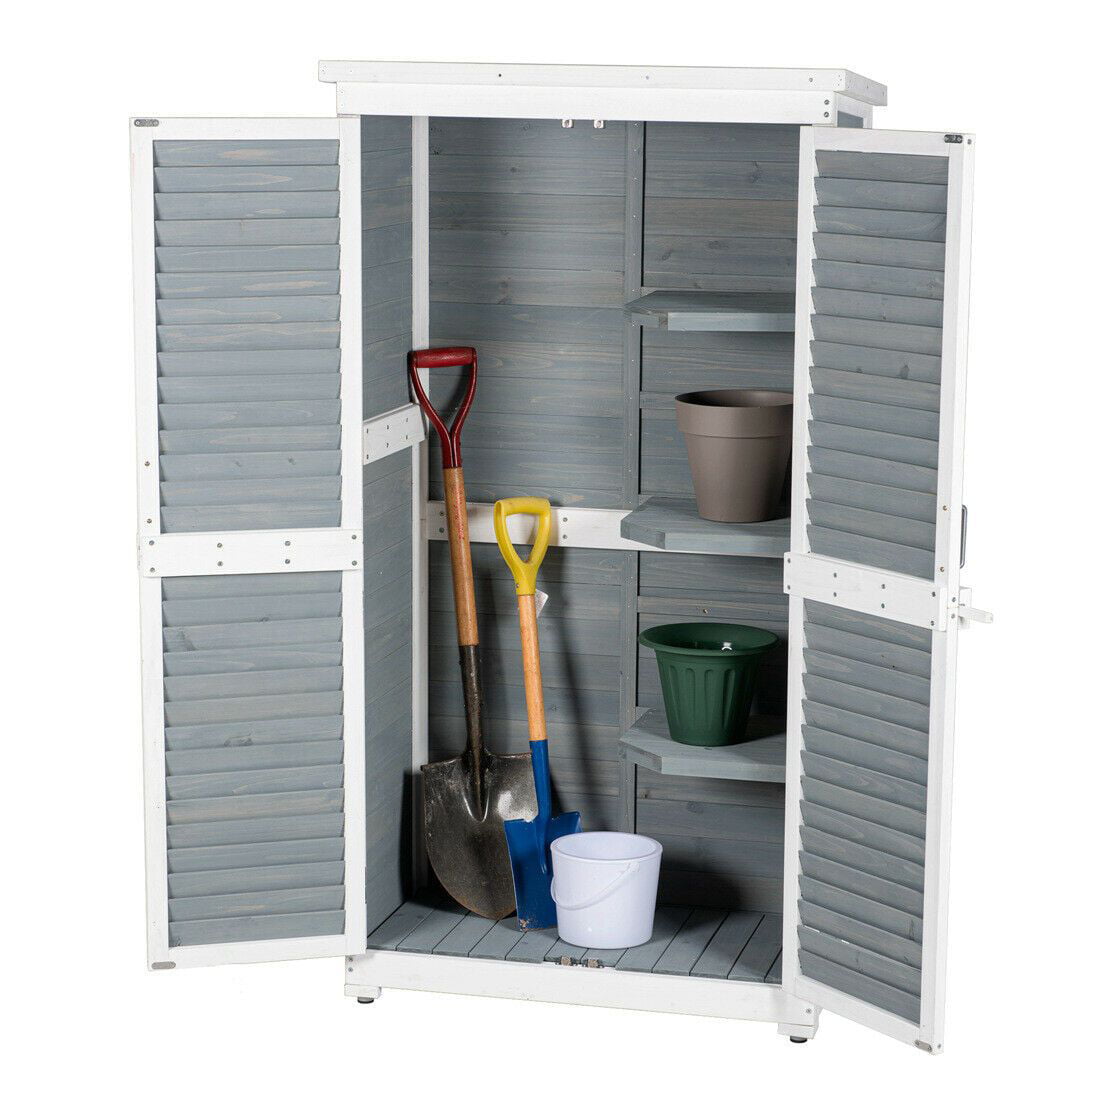 Details about   Outdoor Storage Utility Shed Patio Garden Vertical Tool Cabinet Tall Resin Box 